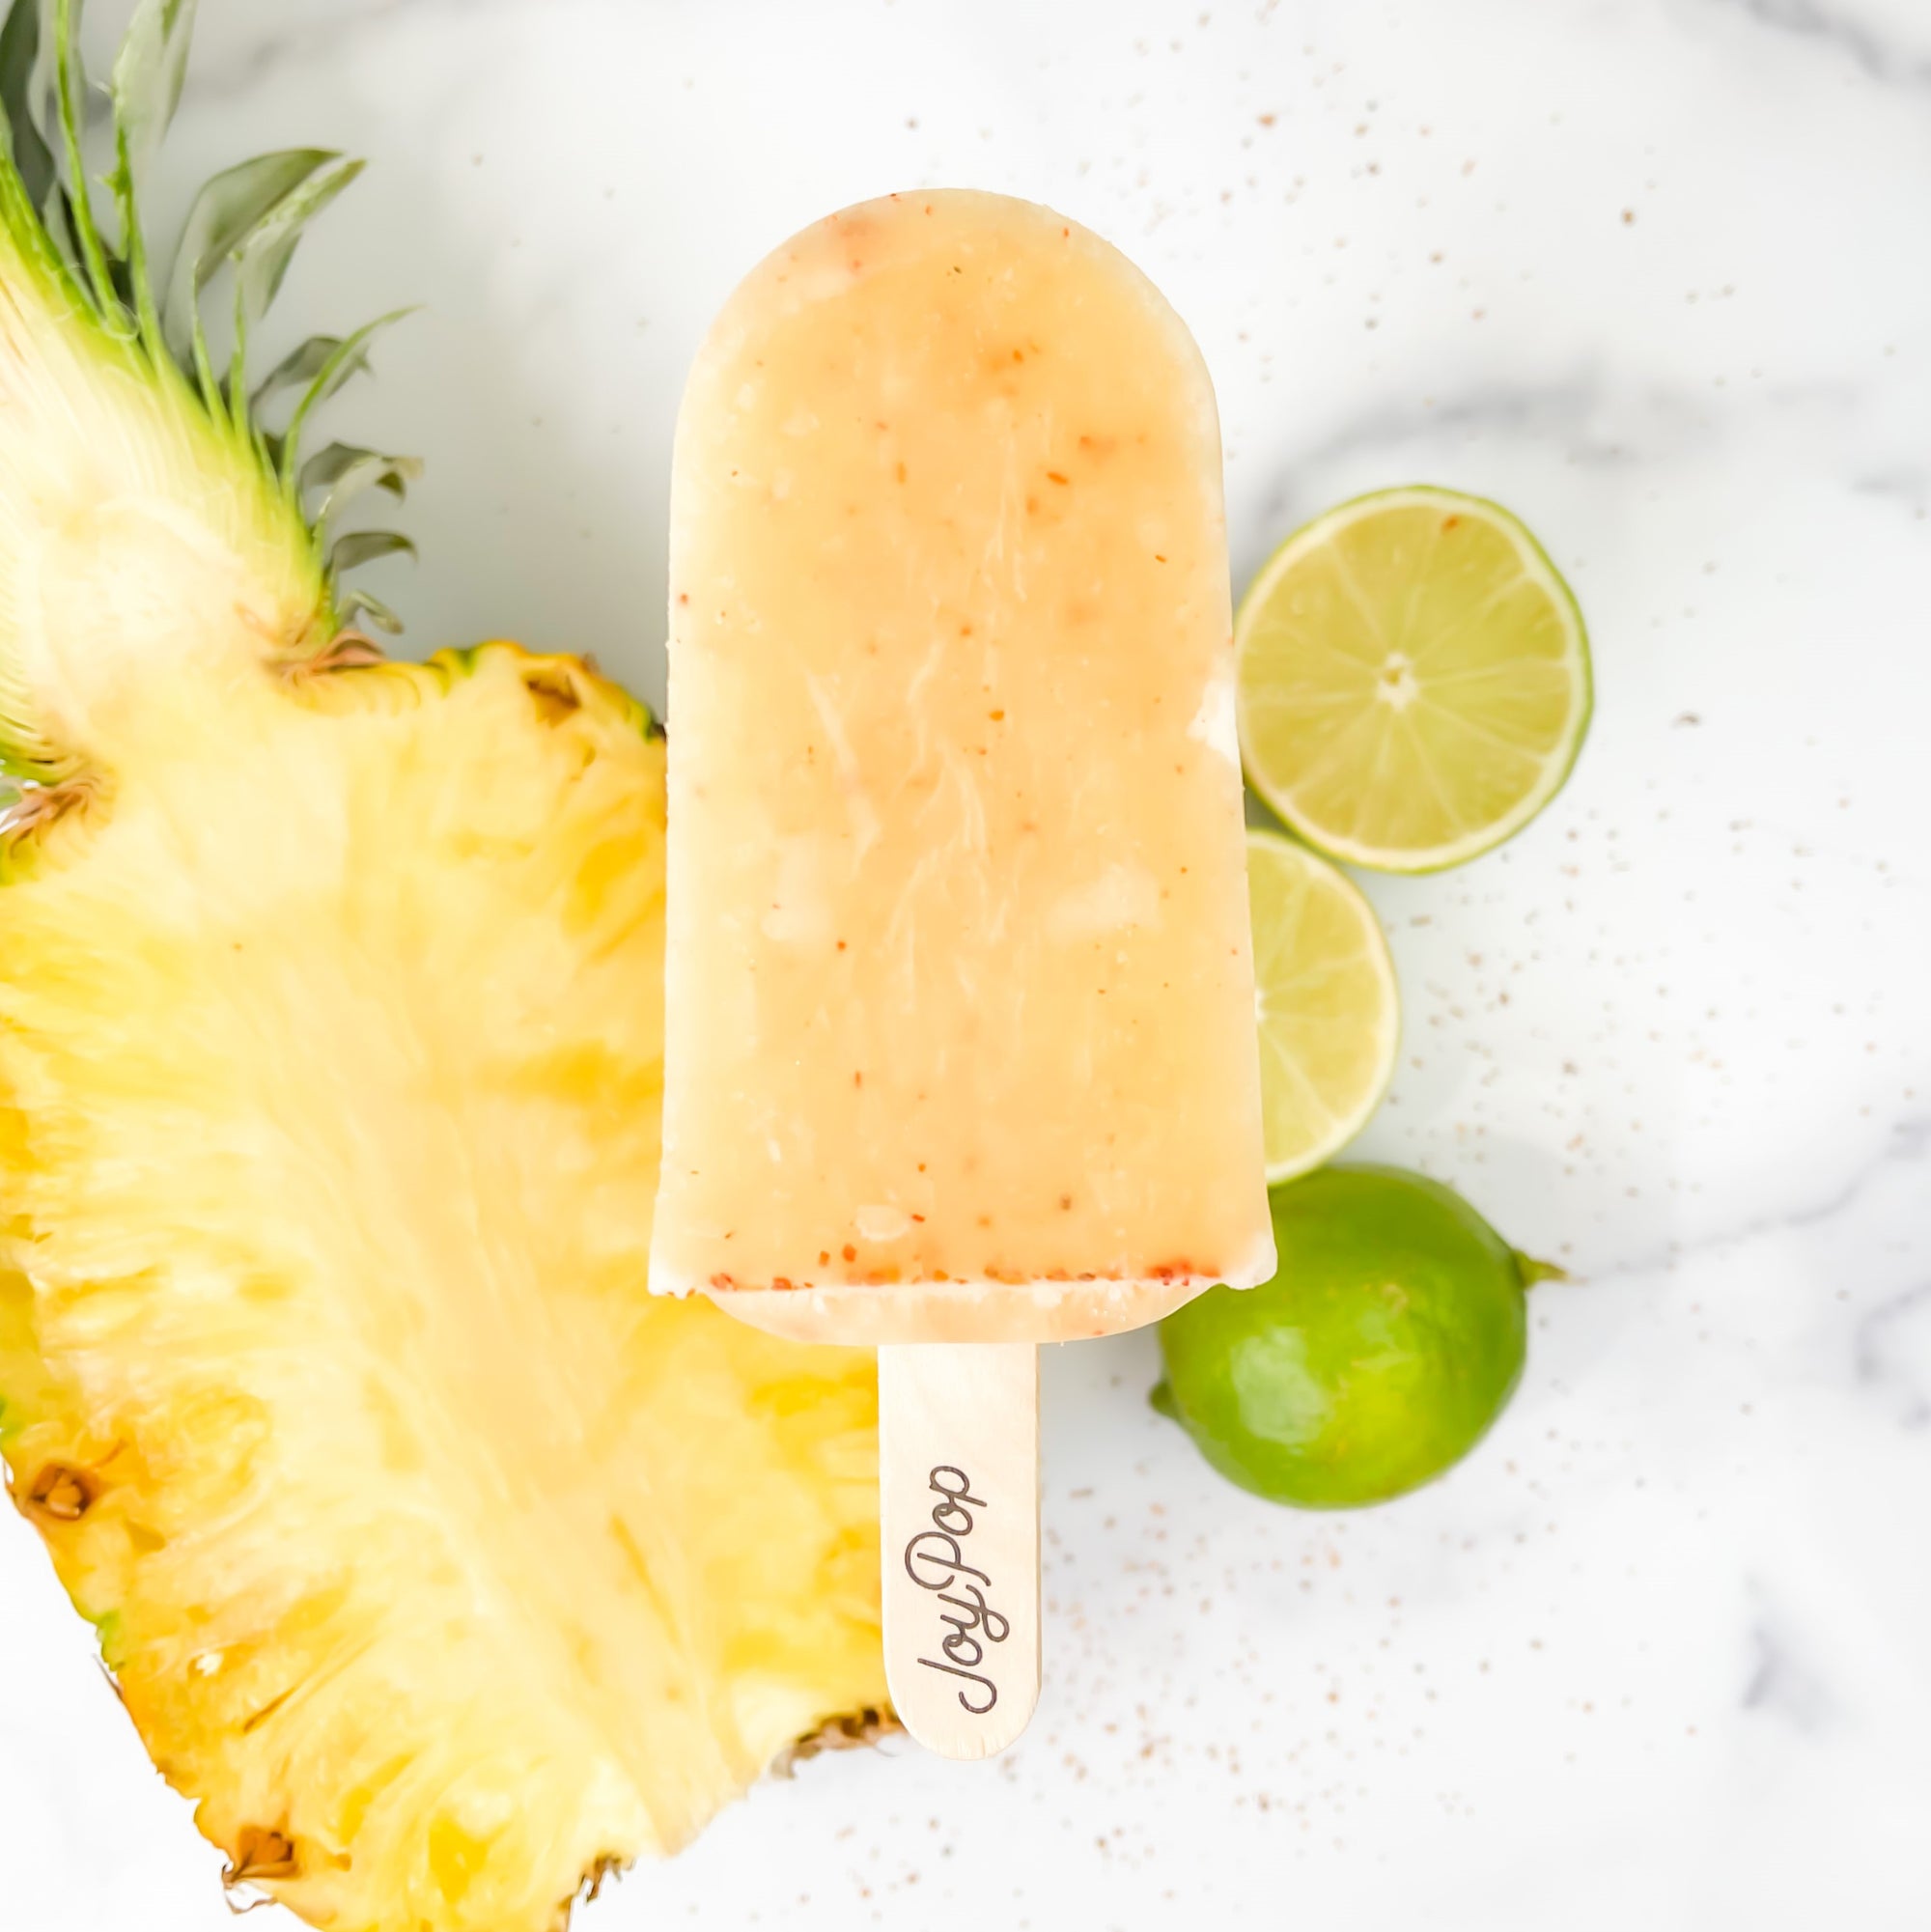 Pineapple Chili Lime Frozen Pop by The Joy Pop Co next to a whole lime and cut limes and a half pineapple and chili spices scattered on a white marble background